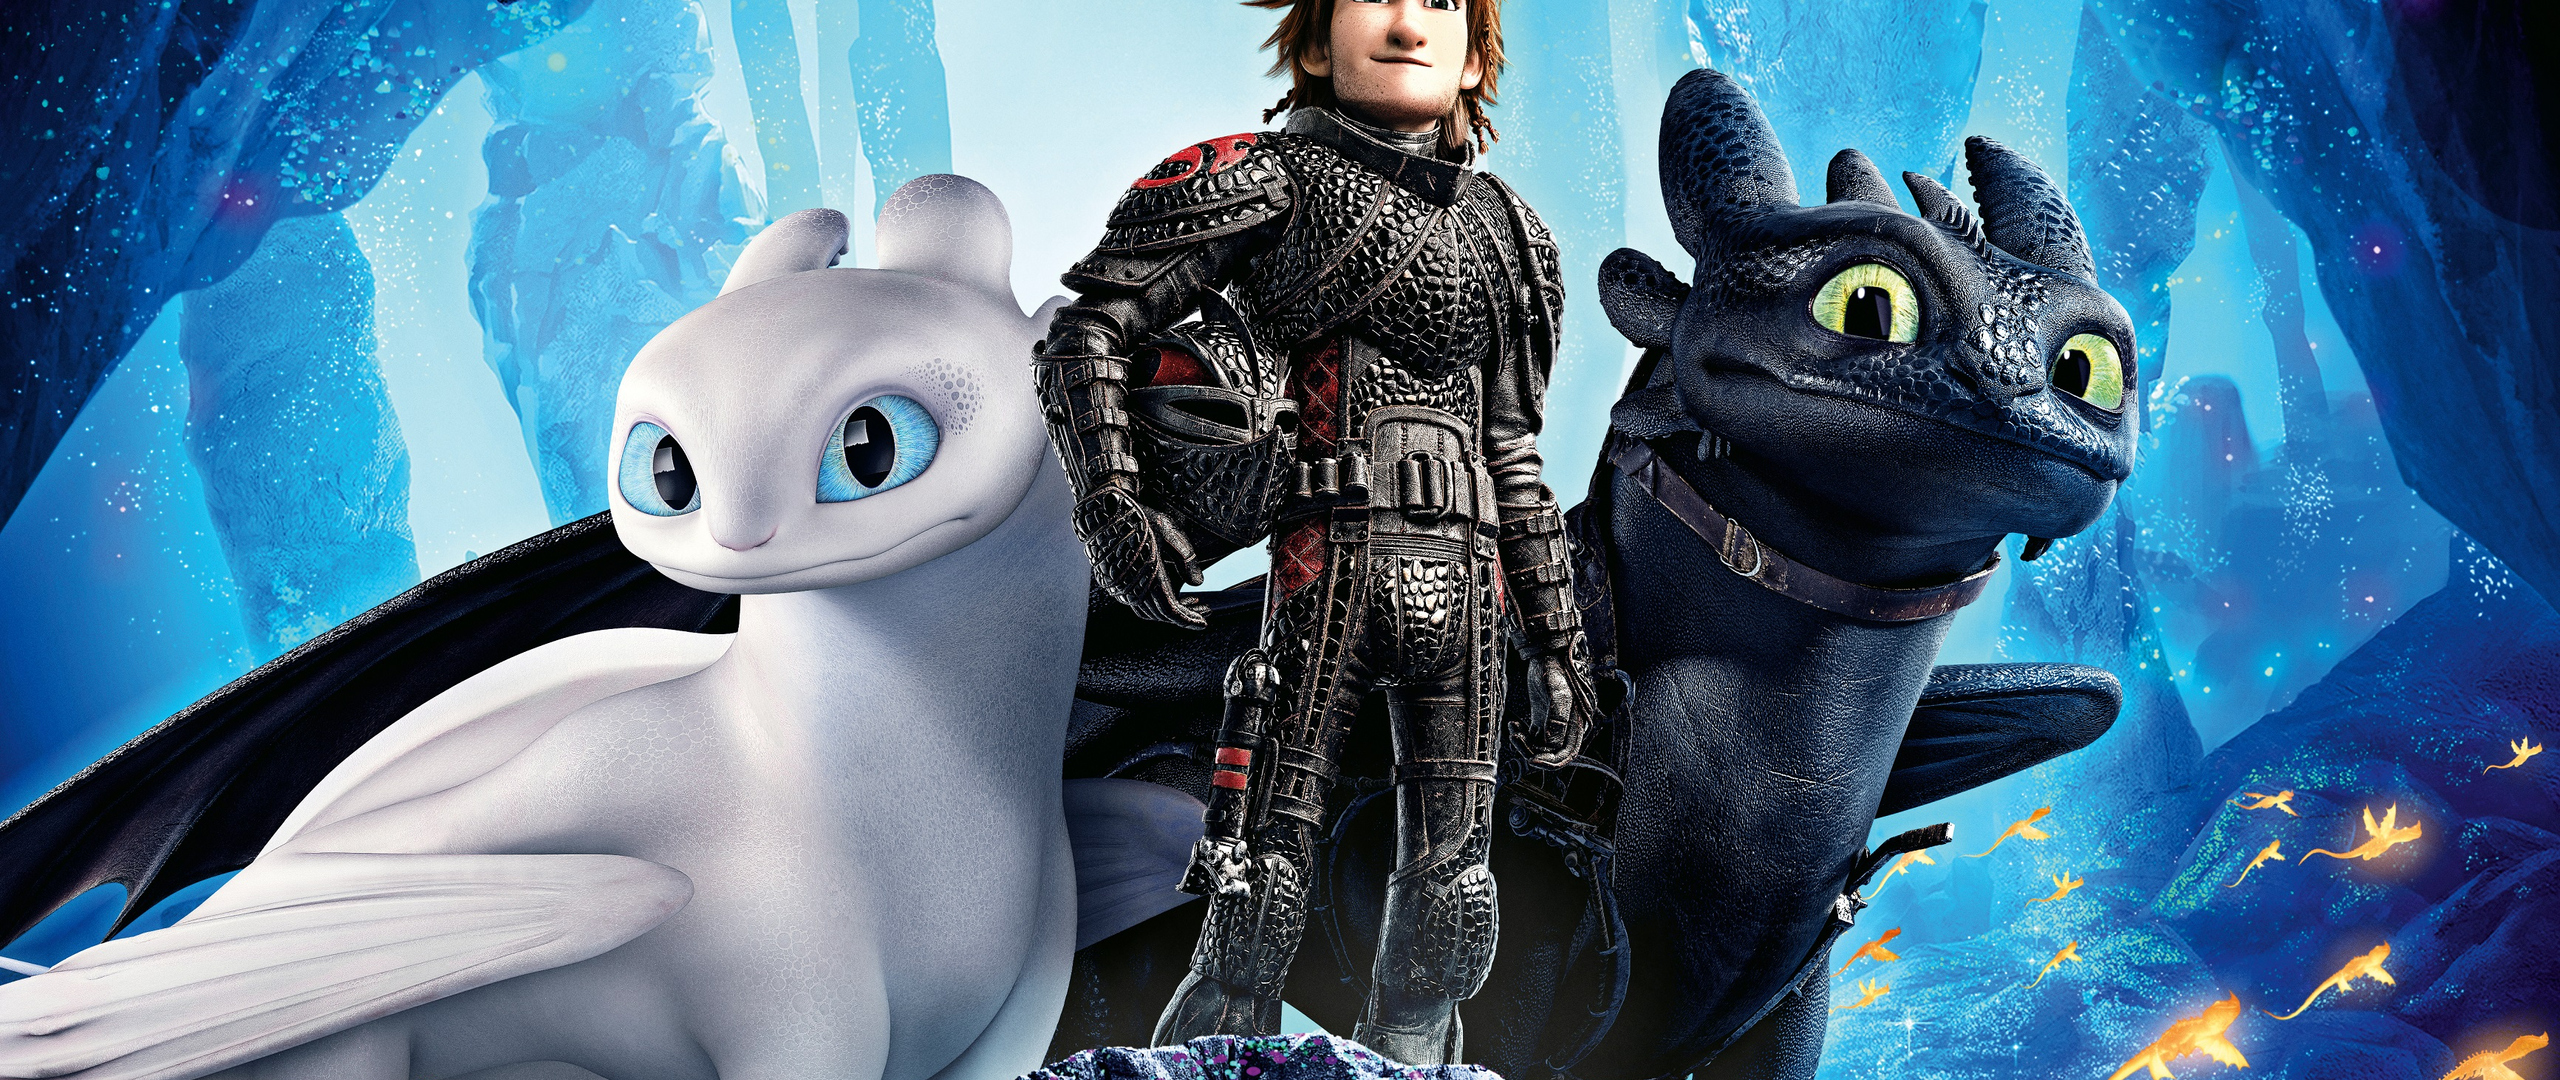 How To Train Your Dragon 3 Parent Directory? 